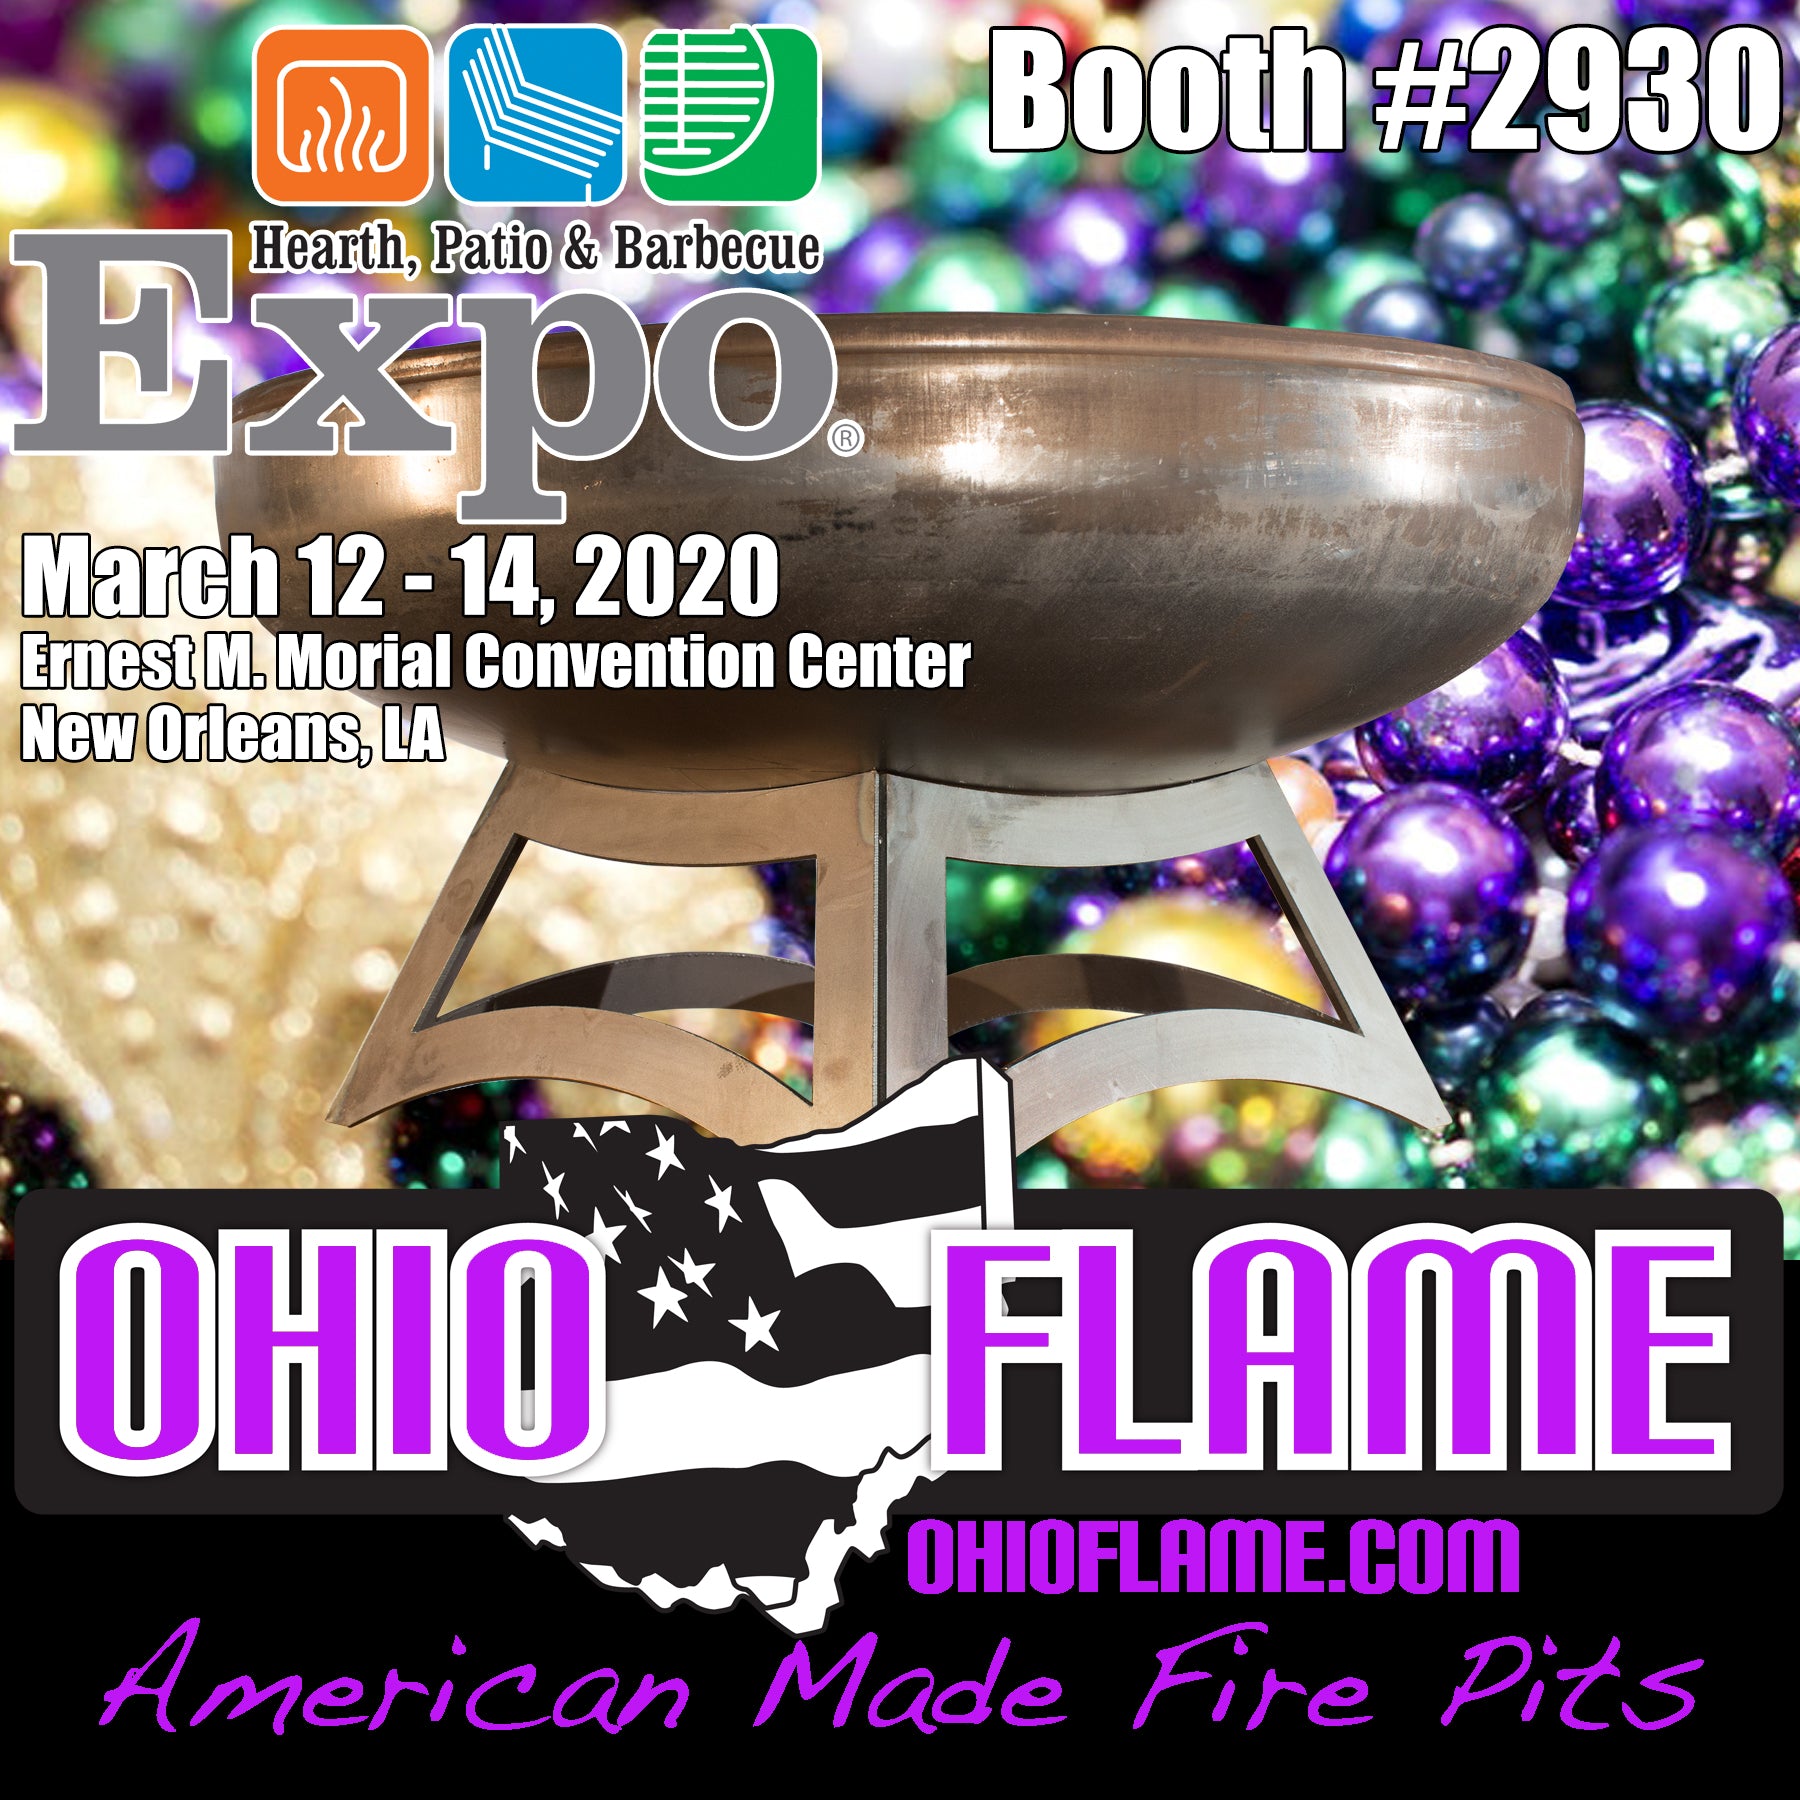 OHIO FLAME HEADS BACK TO NEW ORLEANS!